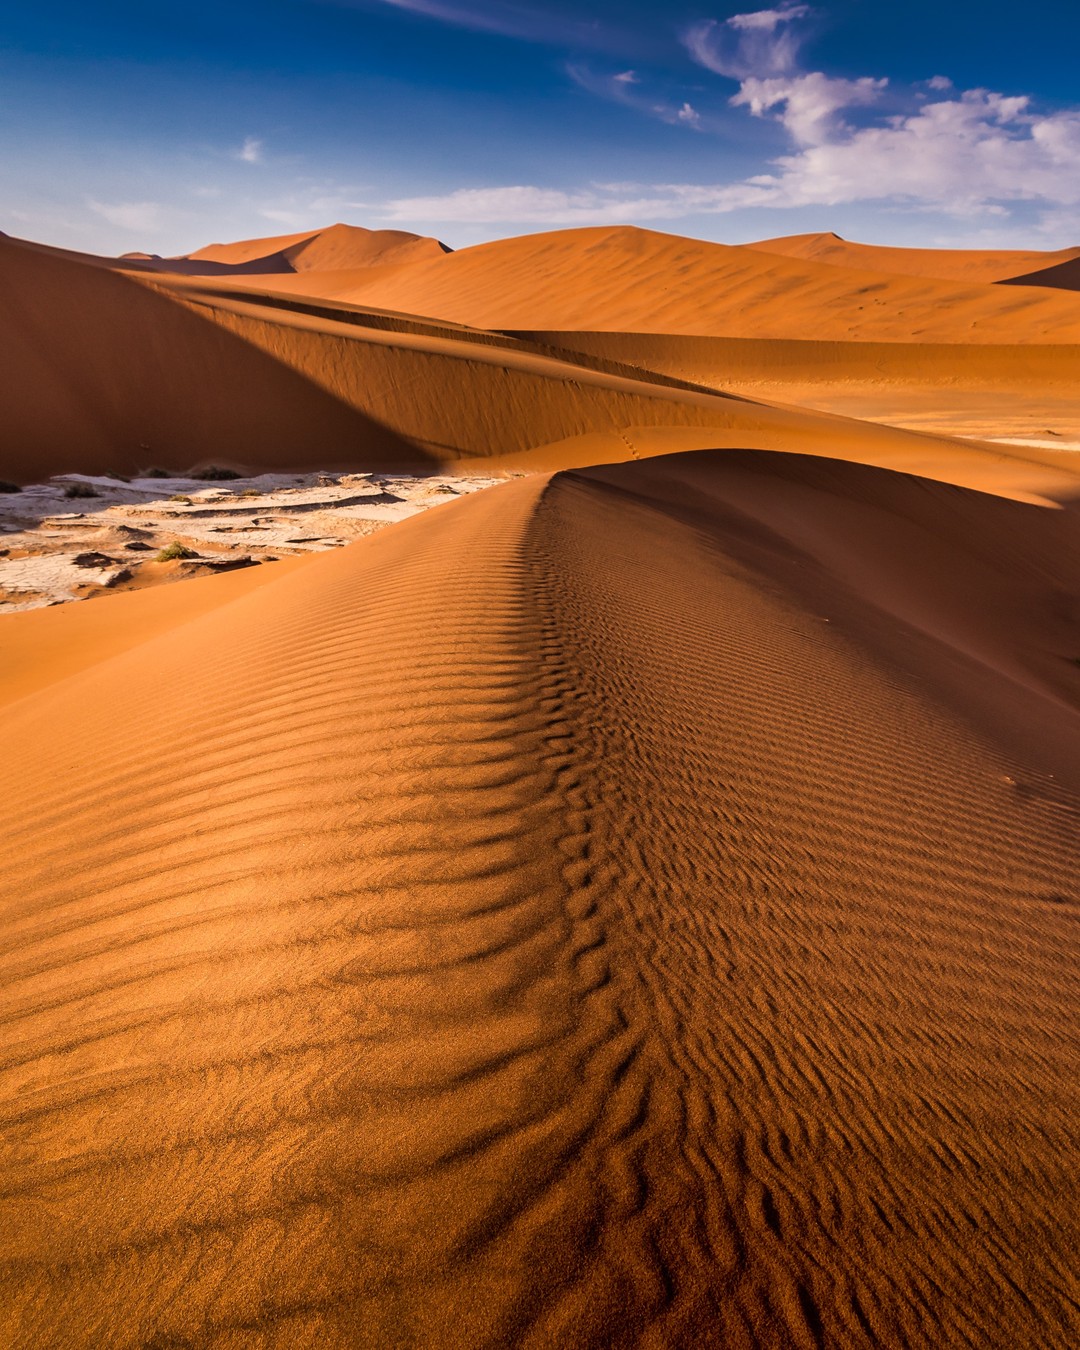 The UNESCO-listed dunes of the Namib Desert in #Namibia are some of the largest in the world.

The dunes, which reach as high as 325m, are forever shifting in shape and hue. The wind moulds and remoulds their contours while their colour changes from ochre to burnished orange to fiery red over the course of a day.
-
-
-
-
-
#NamibDesert #exploringnamibia #deadvleinamibia #seenamibia #namibiatravel #travelnamibia #sharemynamibia #thisisnamibia #lonelyplanet #iamatraveler #stillatraveler #suitcasetravels #tlpicks #roughguides